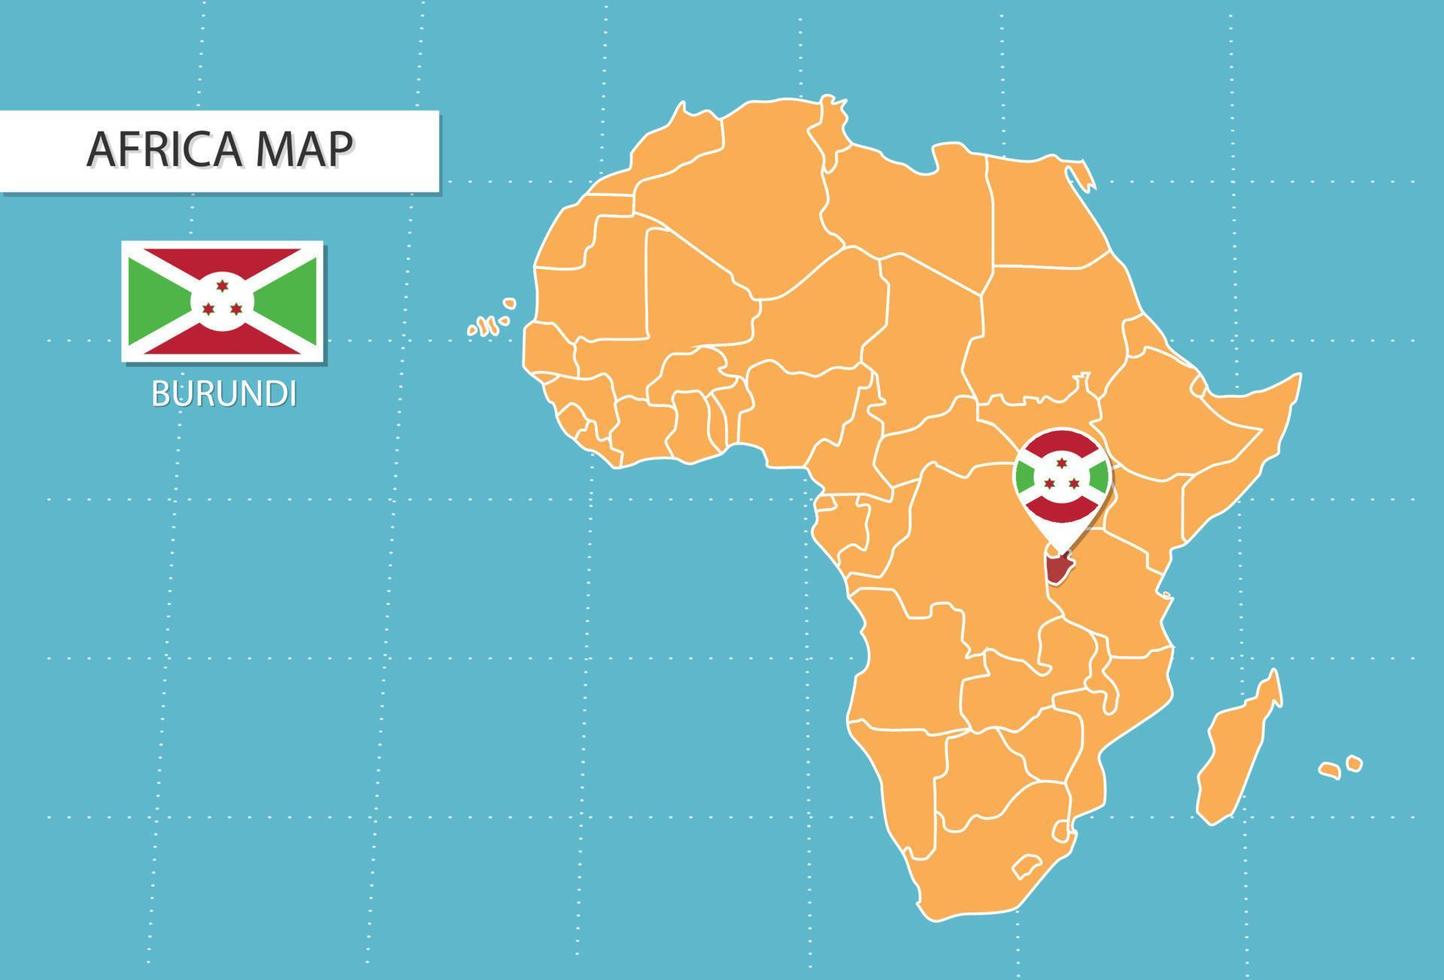 Burundi map in Africa, icons showing Burundi location and flags. vector